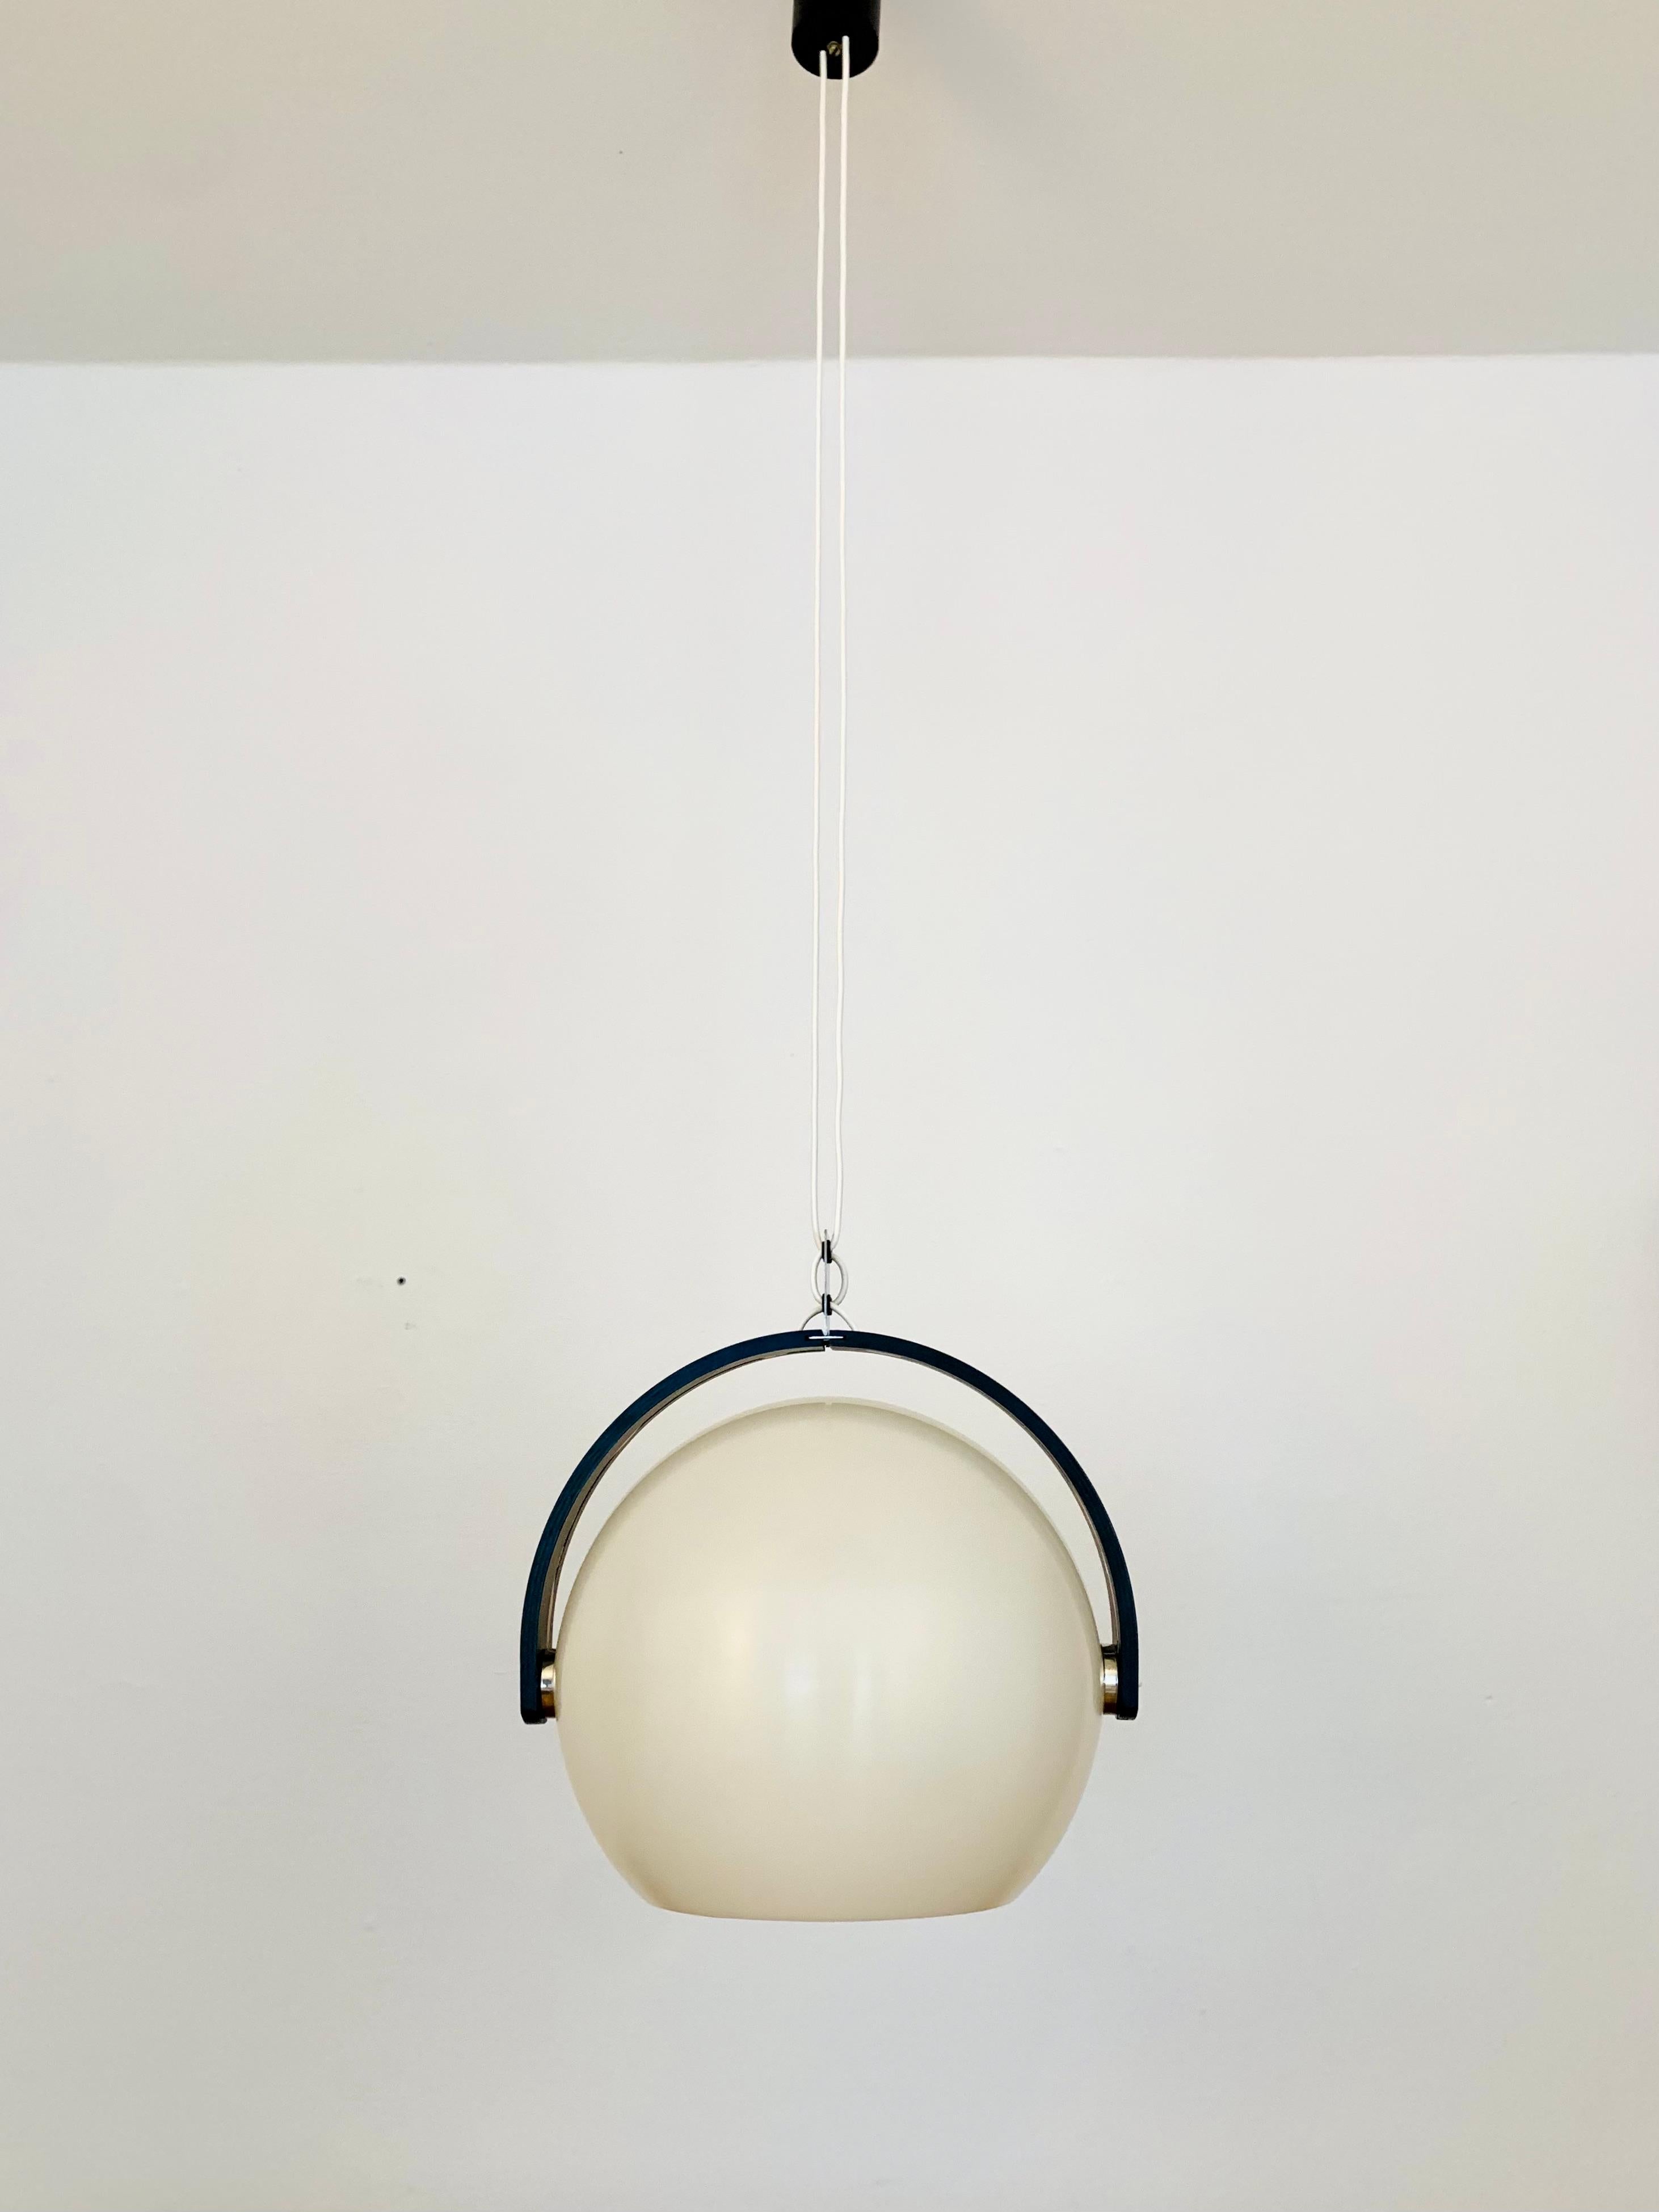 Beautiful pendant lamp from the 1960s.
Great and unusual design with a fantastically comfortable look.
Very nice curved wood details and high quality workmanship.
A cozy play of light is created.
The lampshade is adjustable.

Manufacturer: